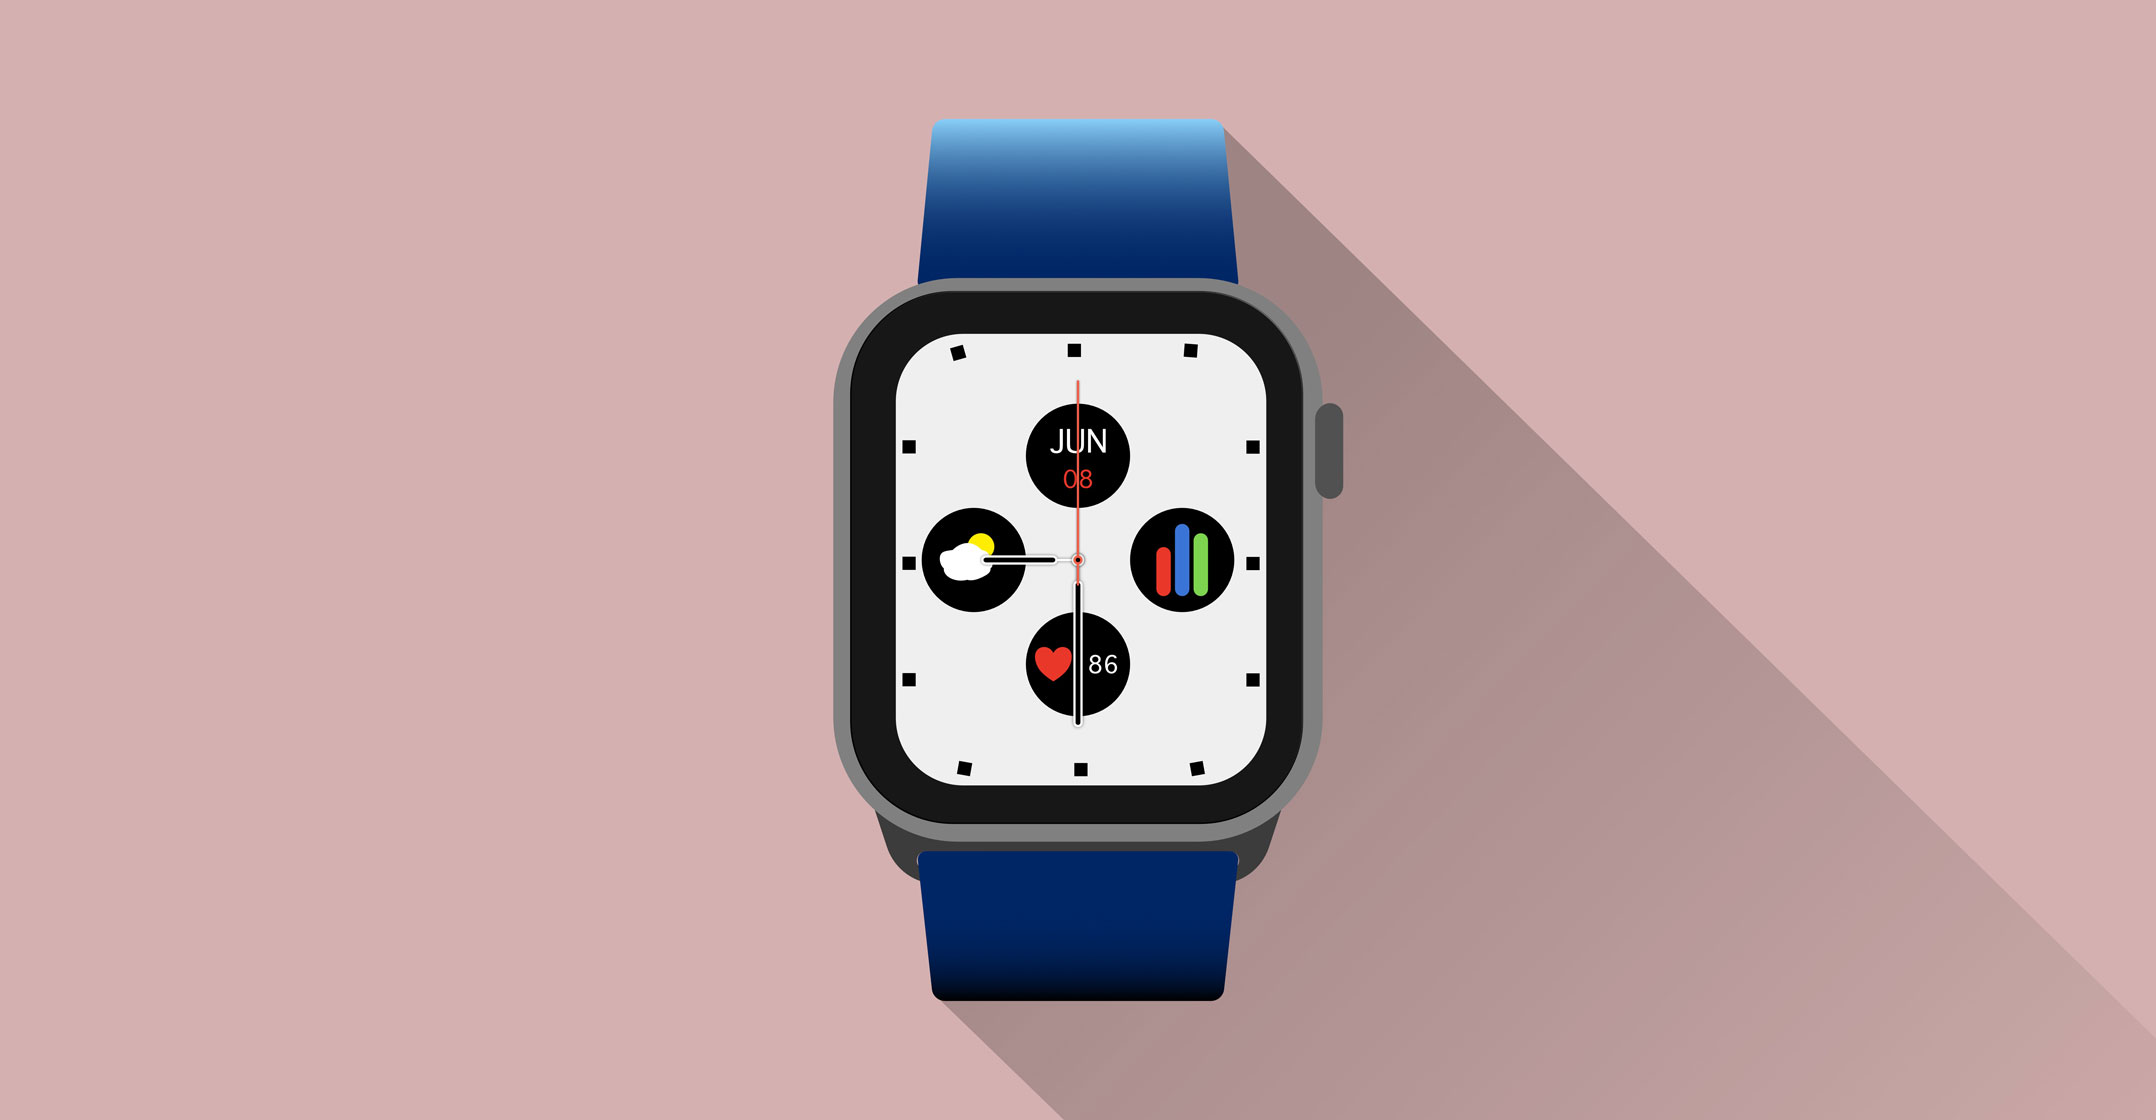 Here's what's next for the Apple Watch - TechCentral